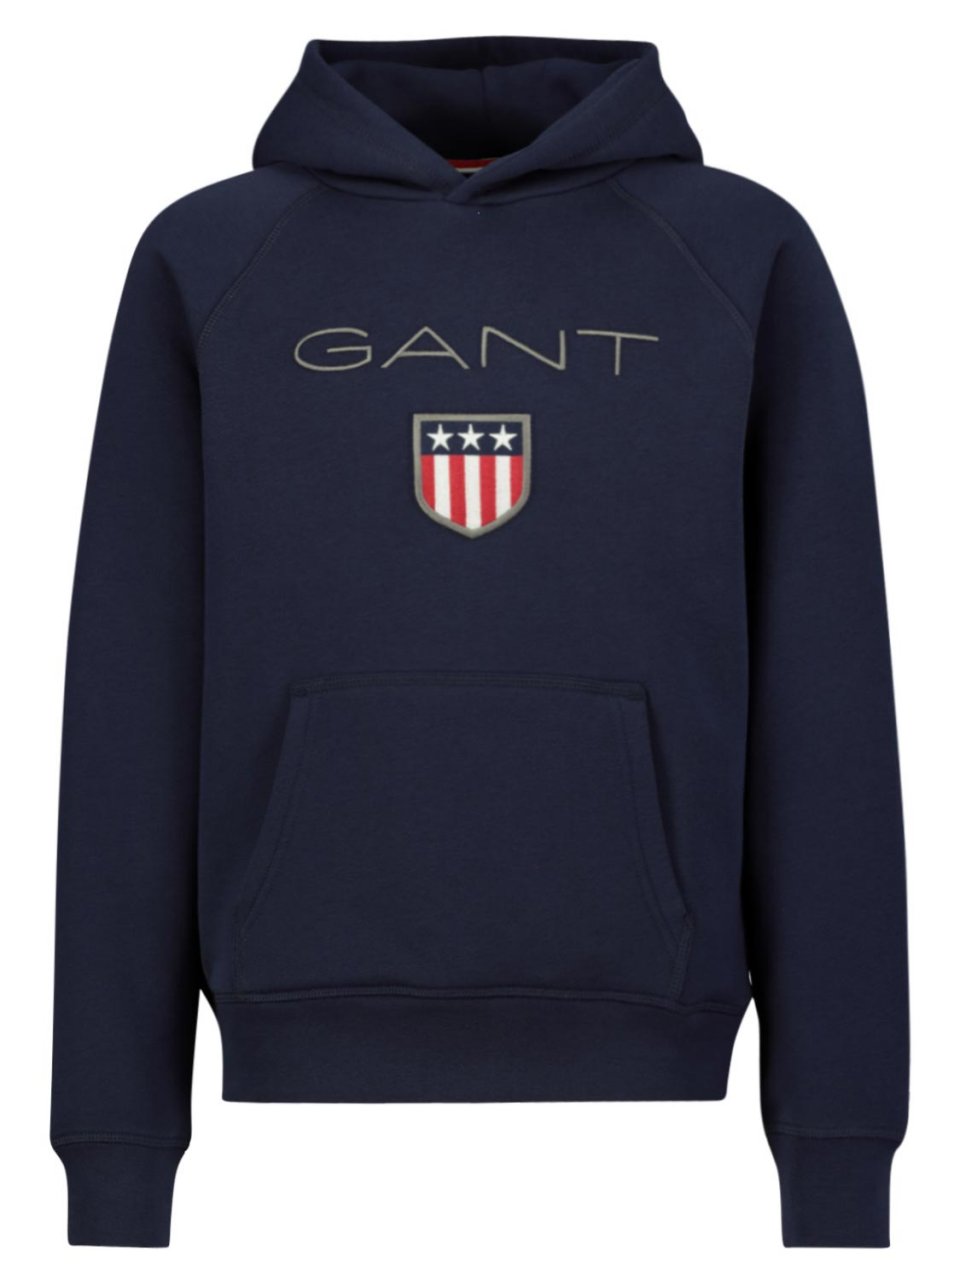 GANT KIDS AND TEEN CLOTHING 906652 NAVY SHIELD HOODIE APPLIQ BRANDED DETAIL 11/12.13/14.15& 16YRS ONLY 